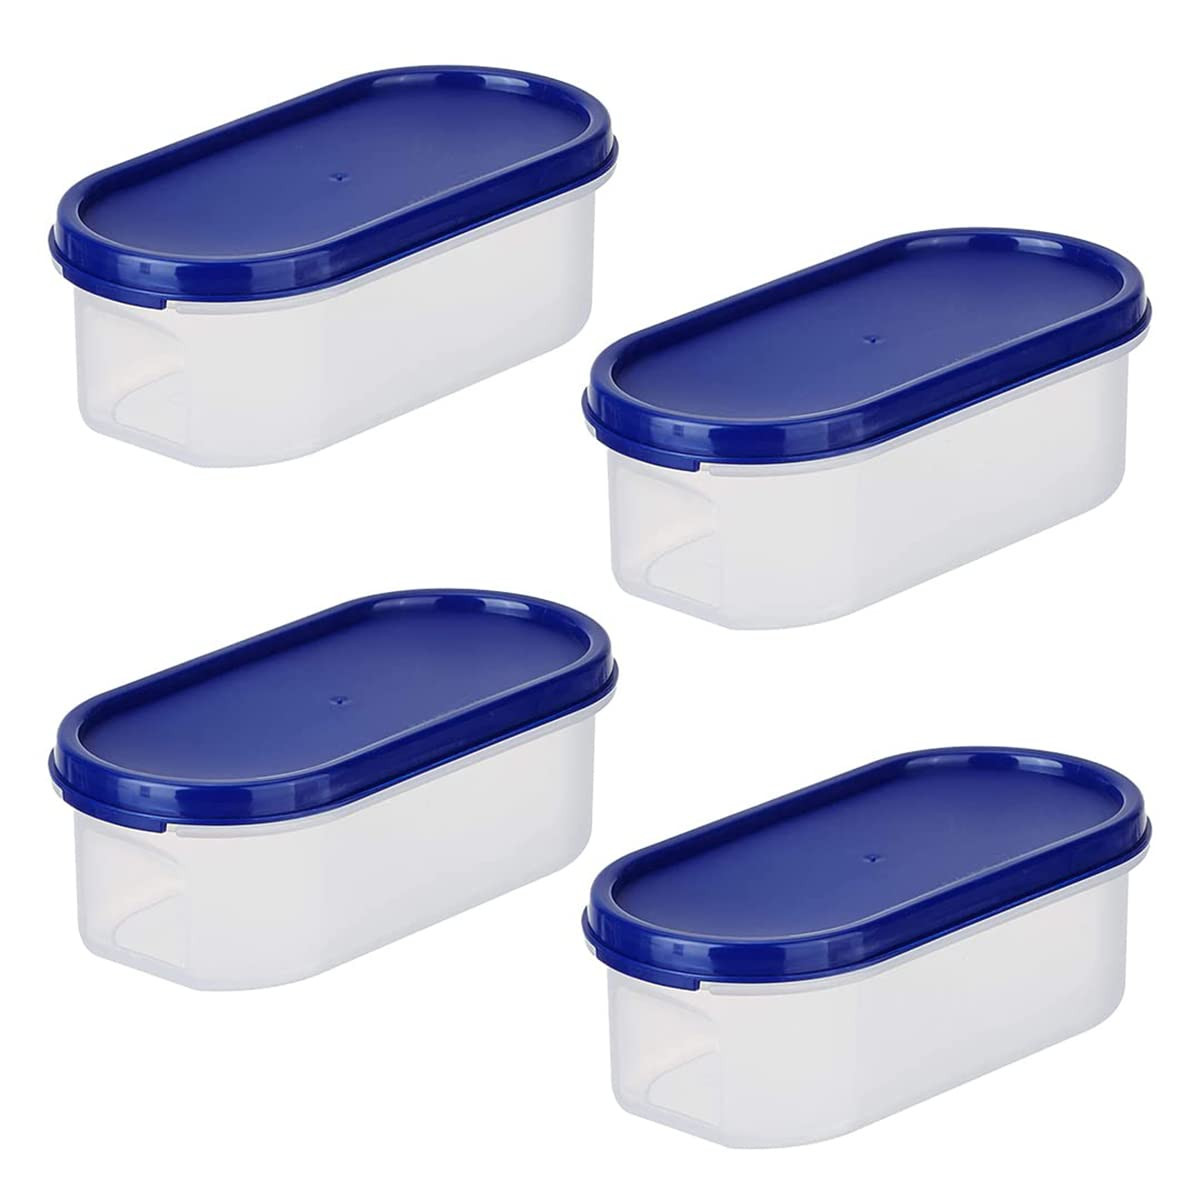 Kuber Industries Plastic Storage Containers With Lid I Set of 4, 500 ml | Airtight, Stackable, Spill-proof, Travel-friendly | Transparent with Blue Lid | For Dry & Wet Food Pickle, Spices, Dryfruits